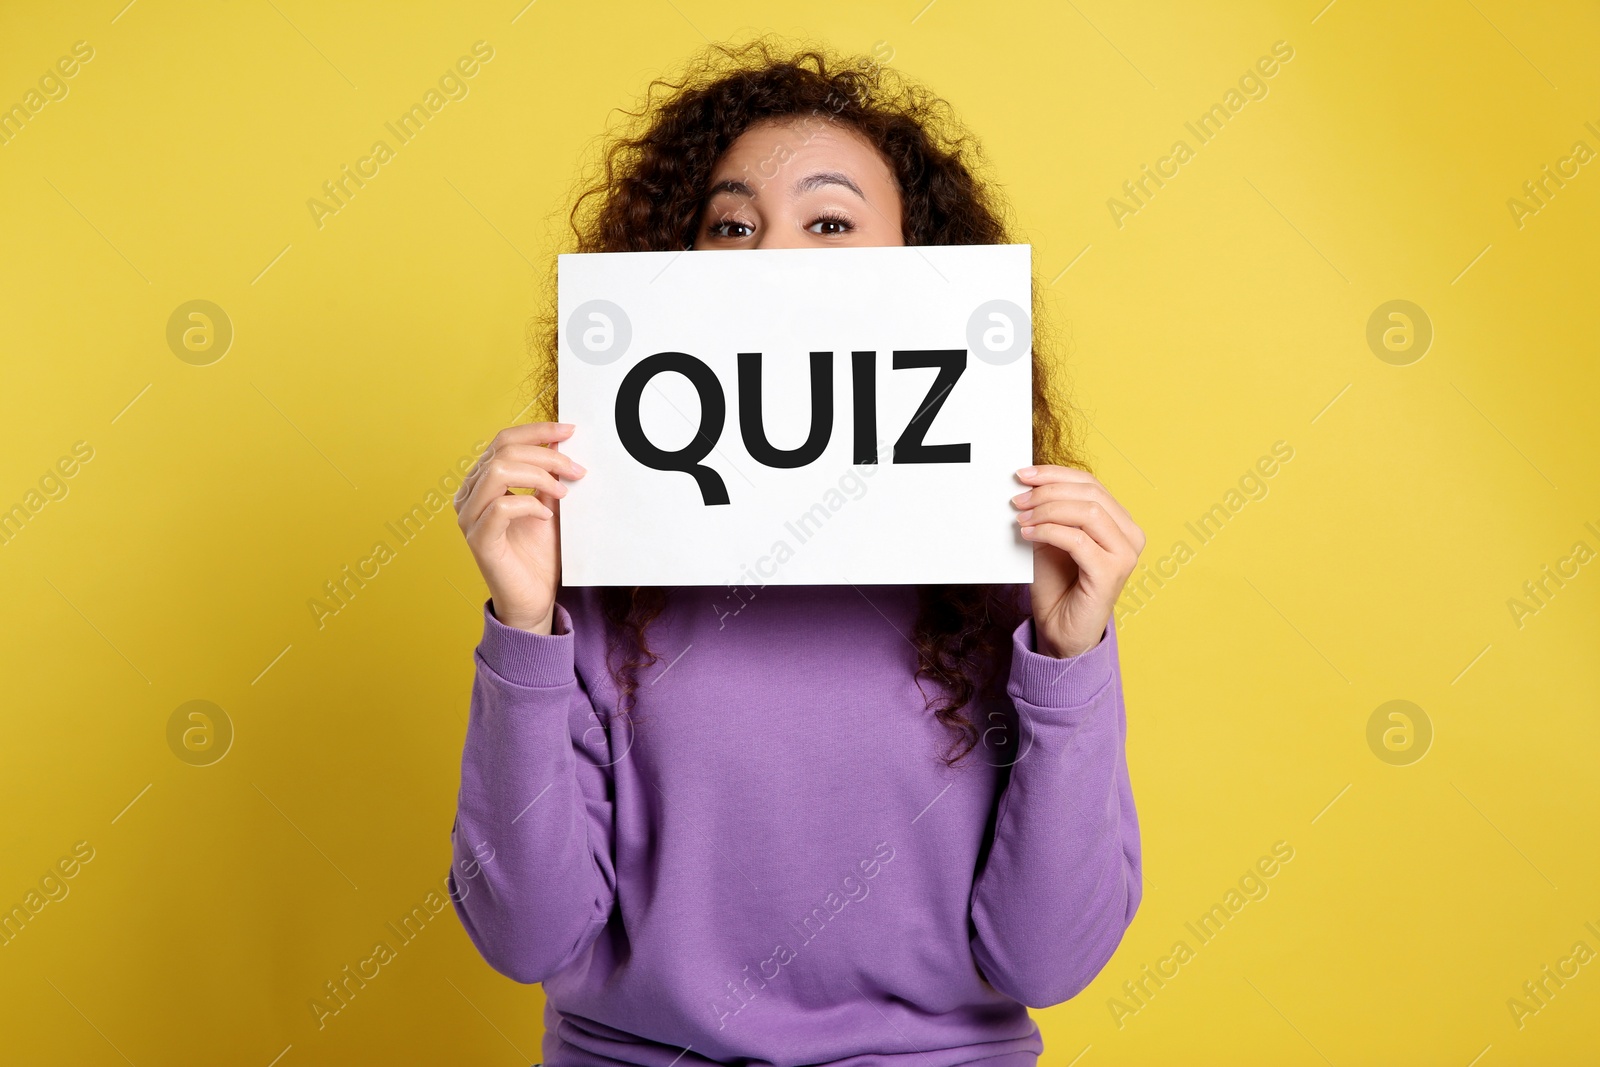 Image of African American woman holding sign with word QUIZ on yellow background